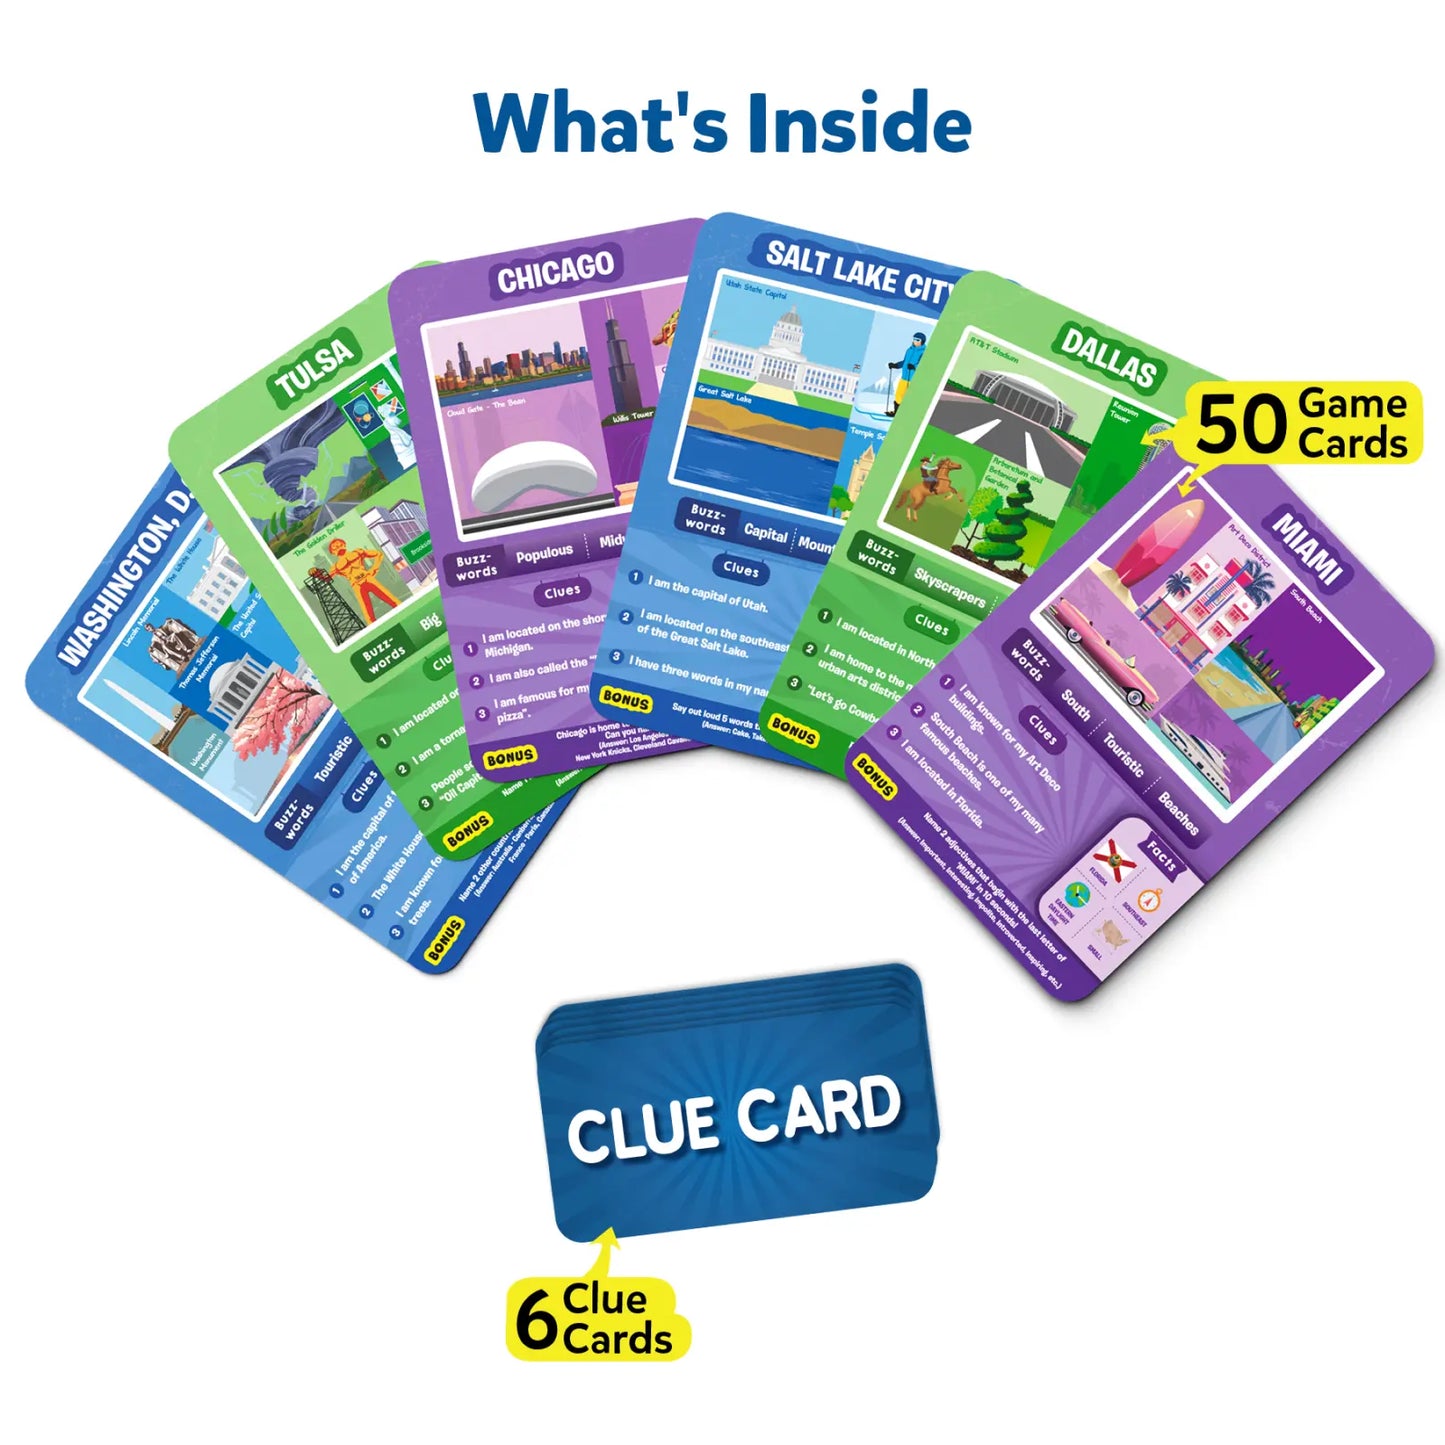 Guess in 10: American Cities | Trivia card game (ages 8+)